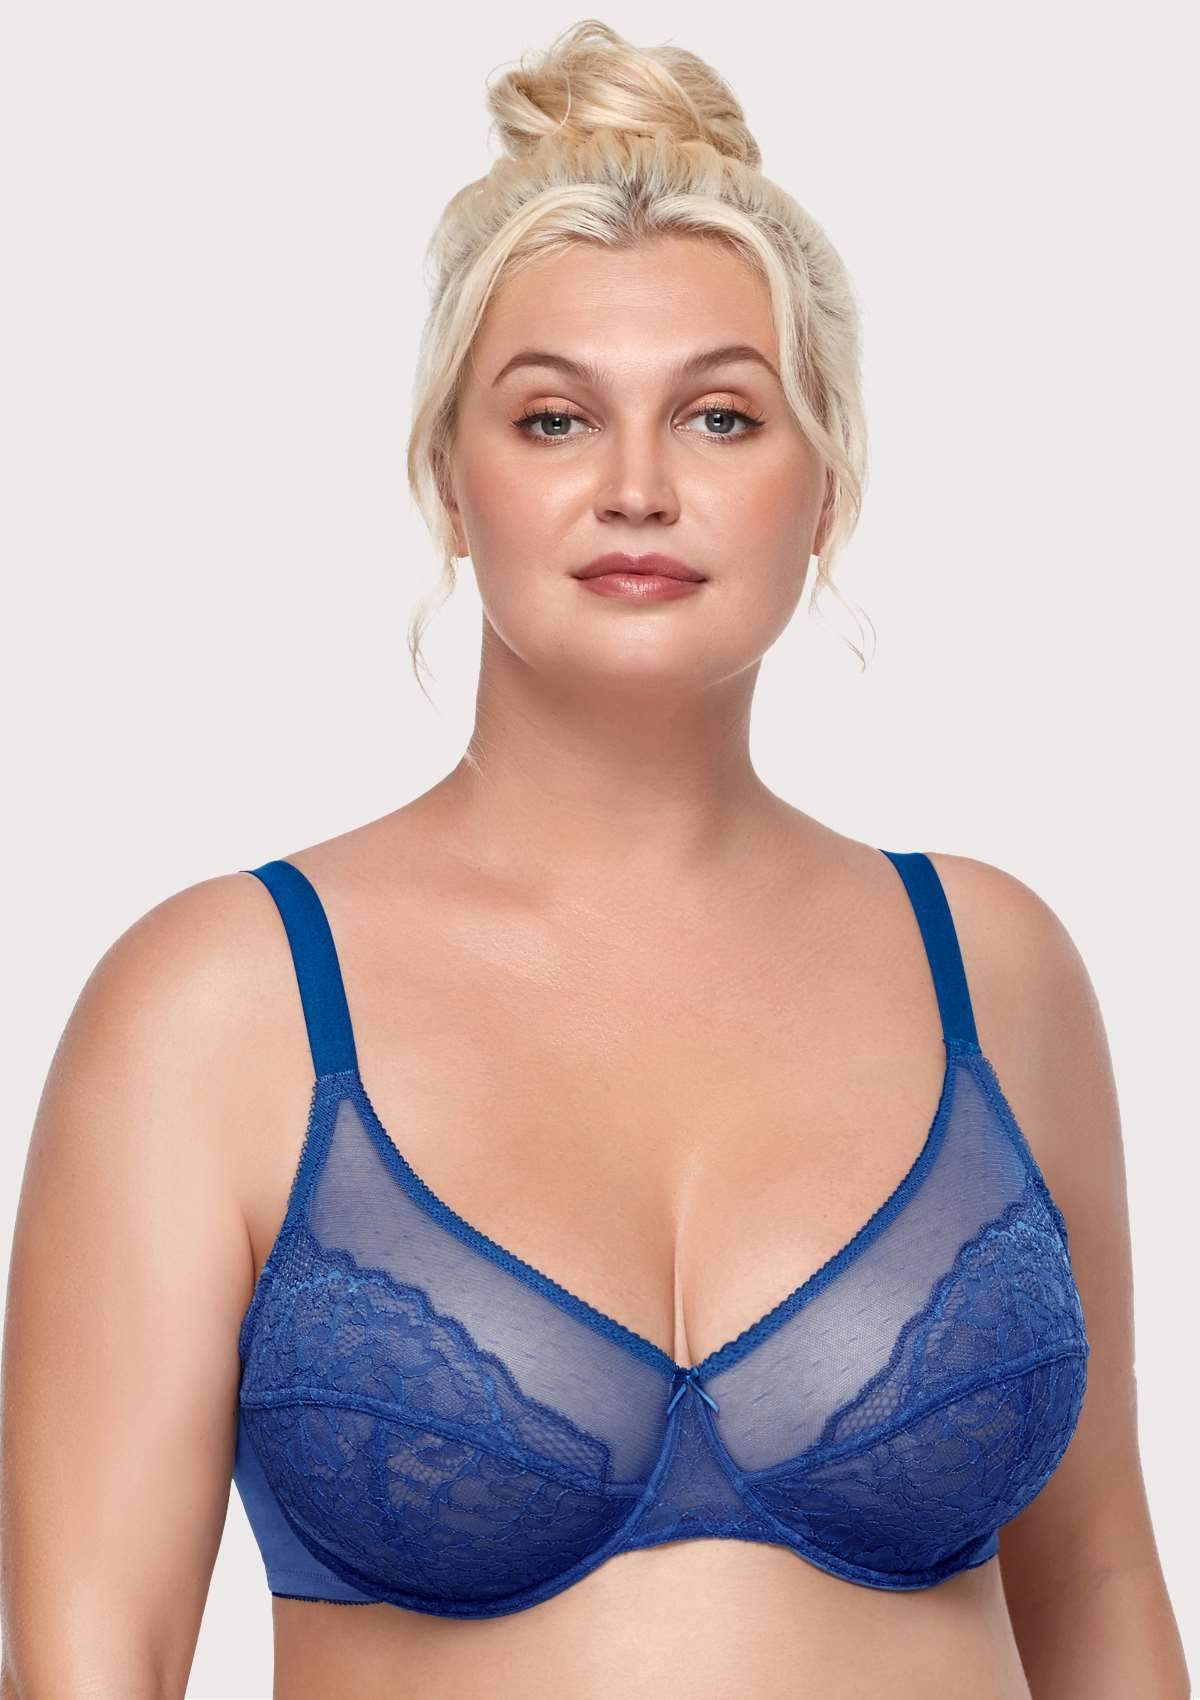 HSIA Enchante Full Coverage Bra: Supportive Bra For Big Busts - Royal Blue / 32 / C